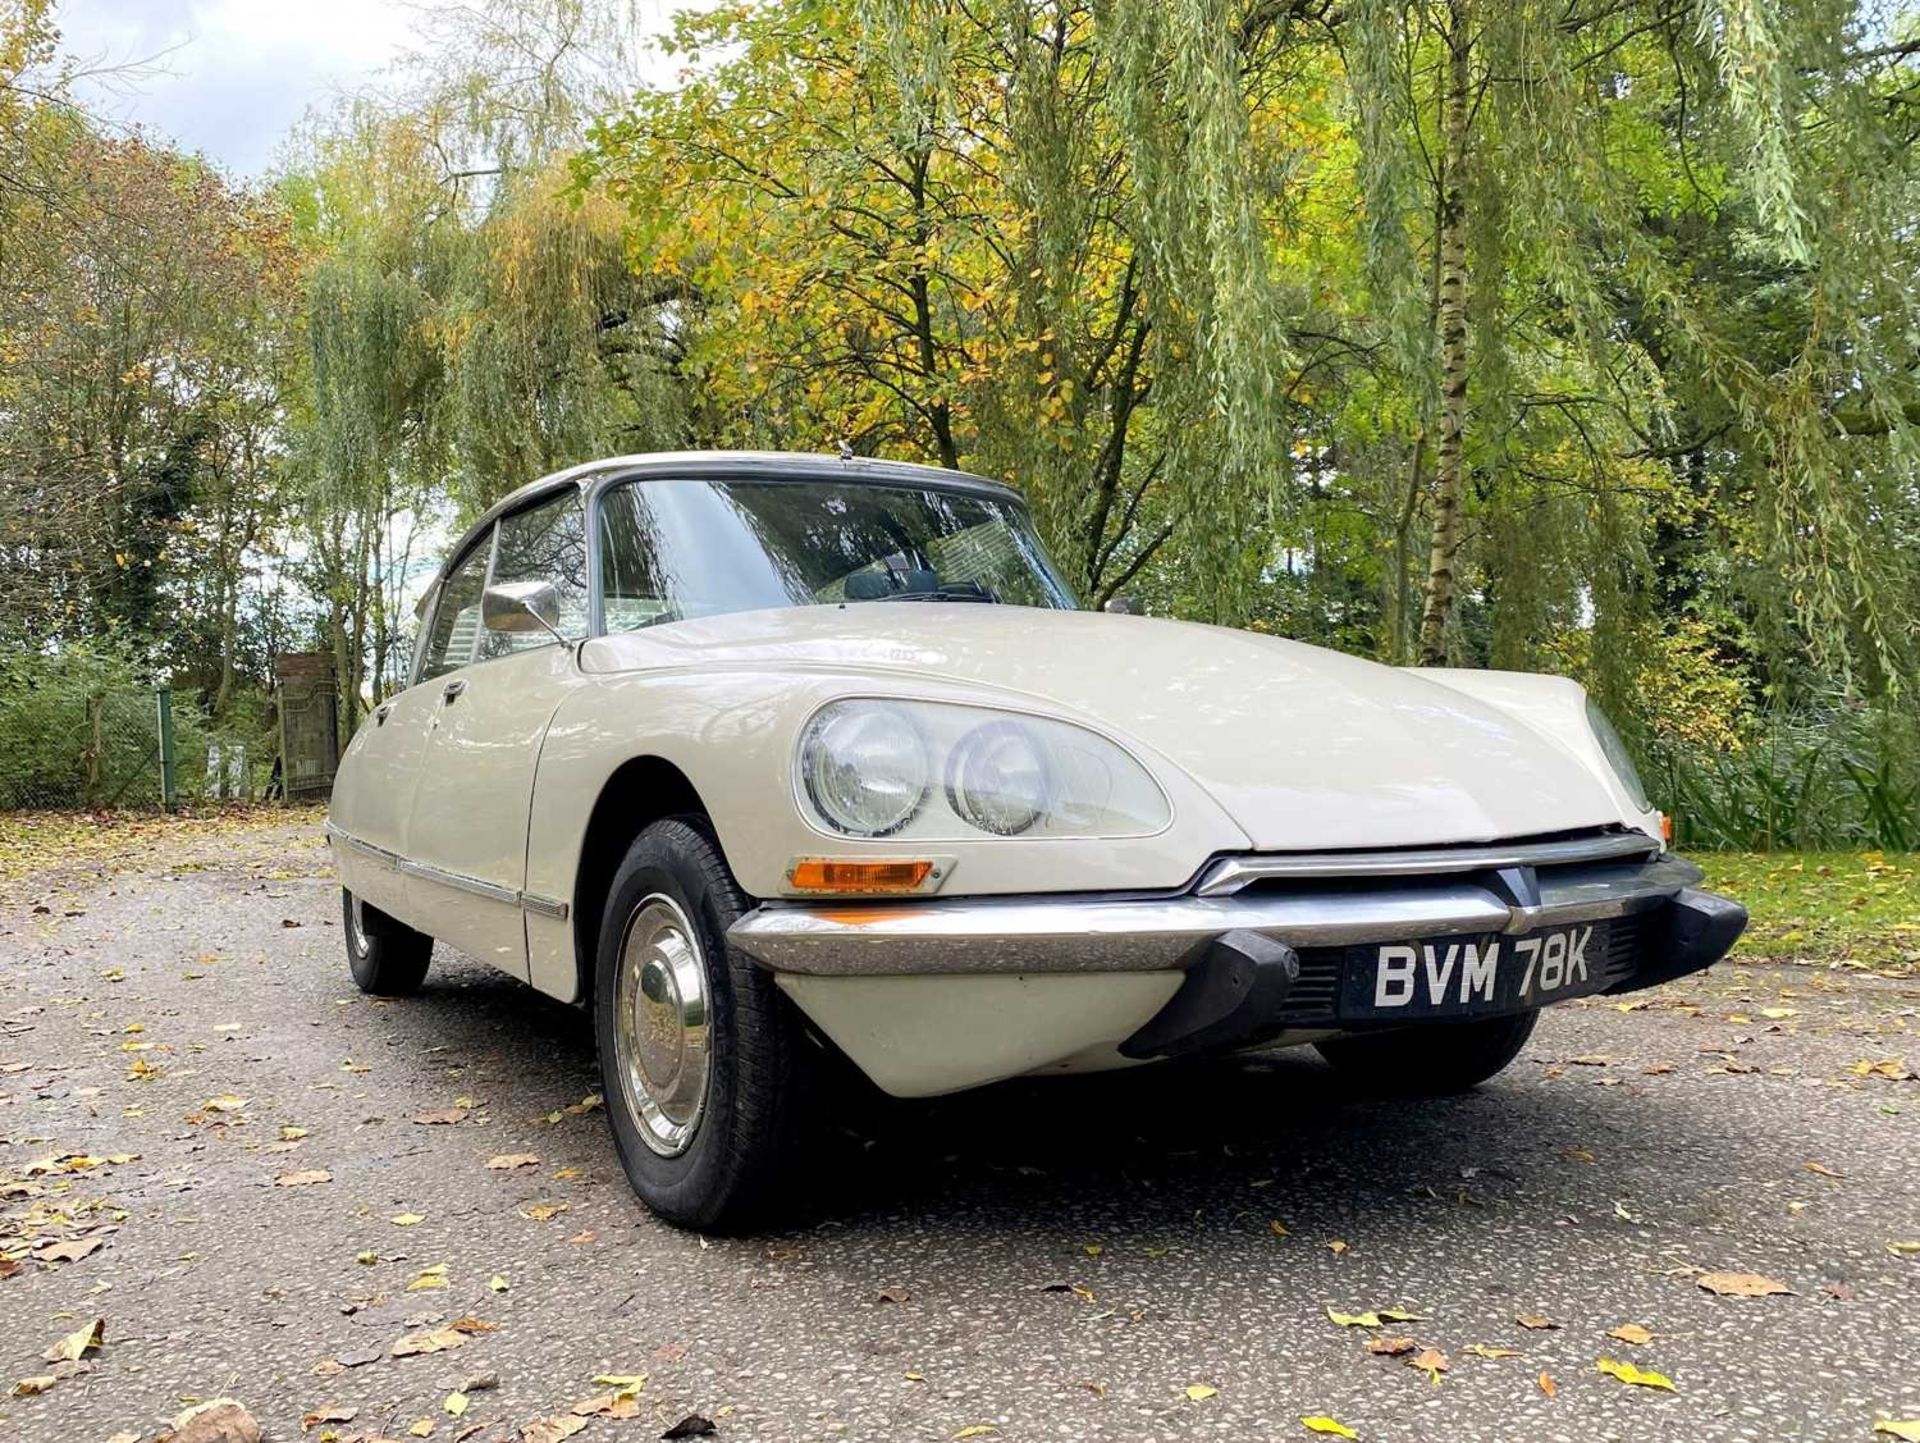 1971 Citroën DS21 Recently completed a 2,000 mile European grand tour - Image 5 of 100